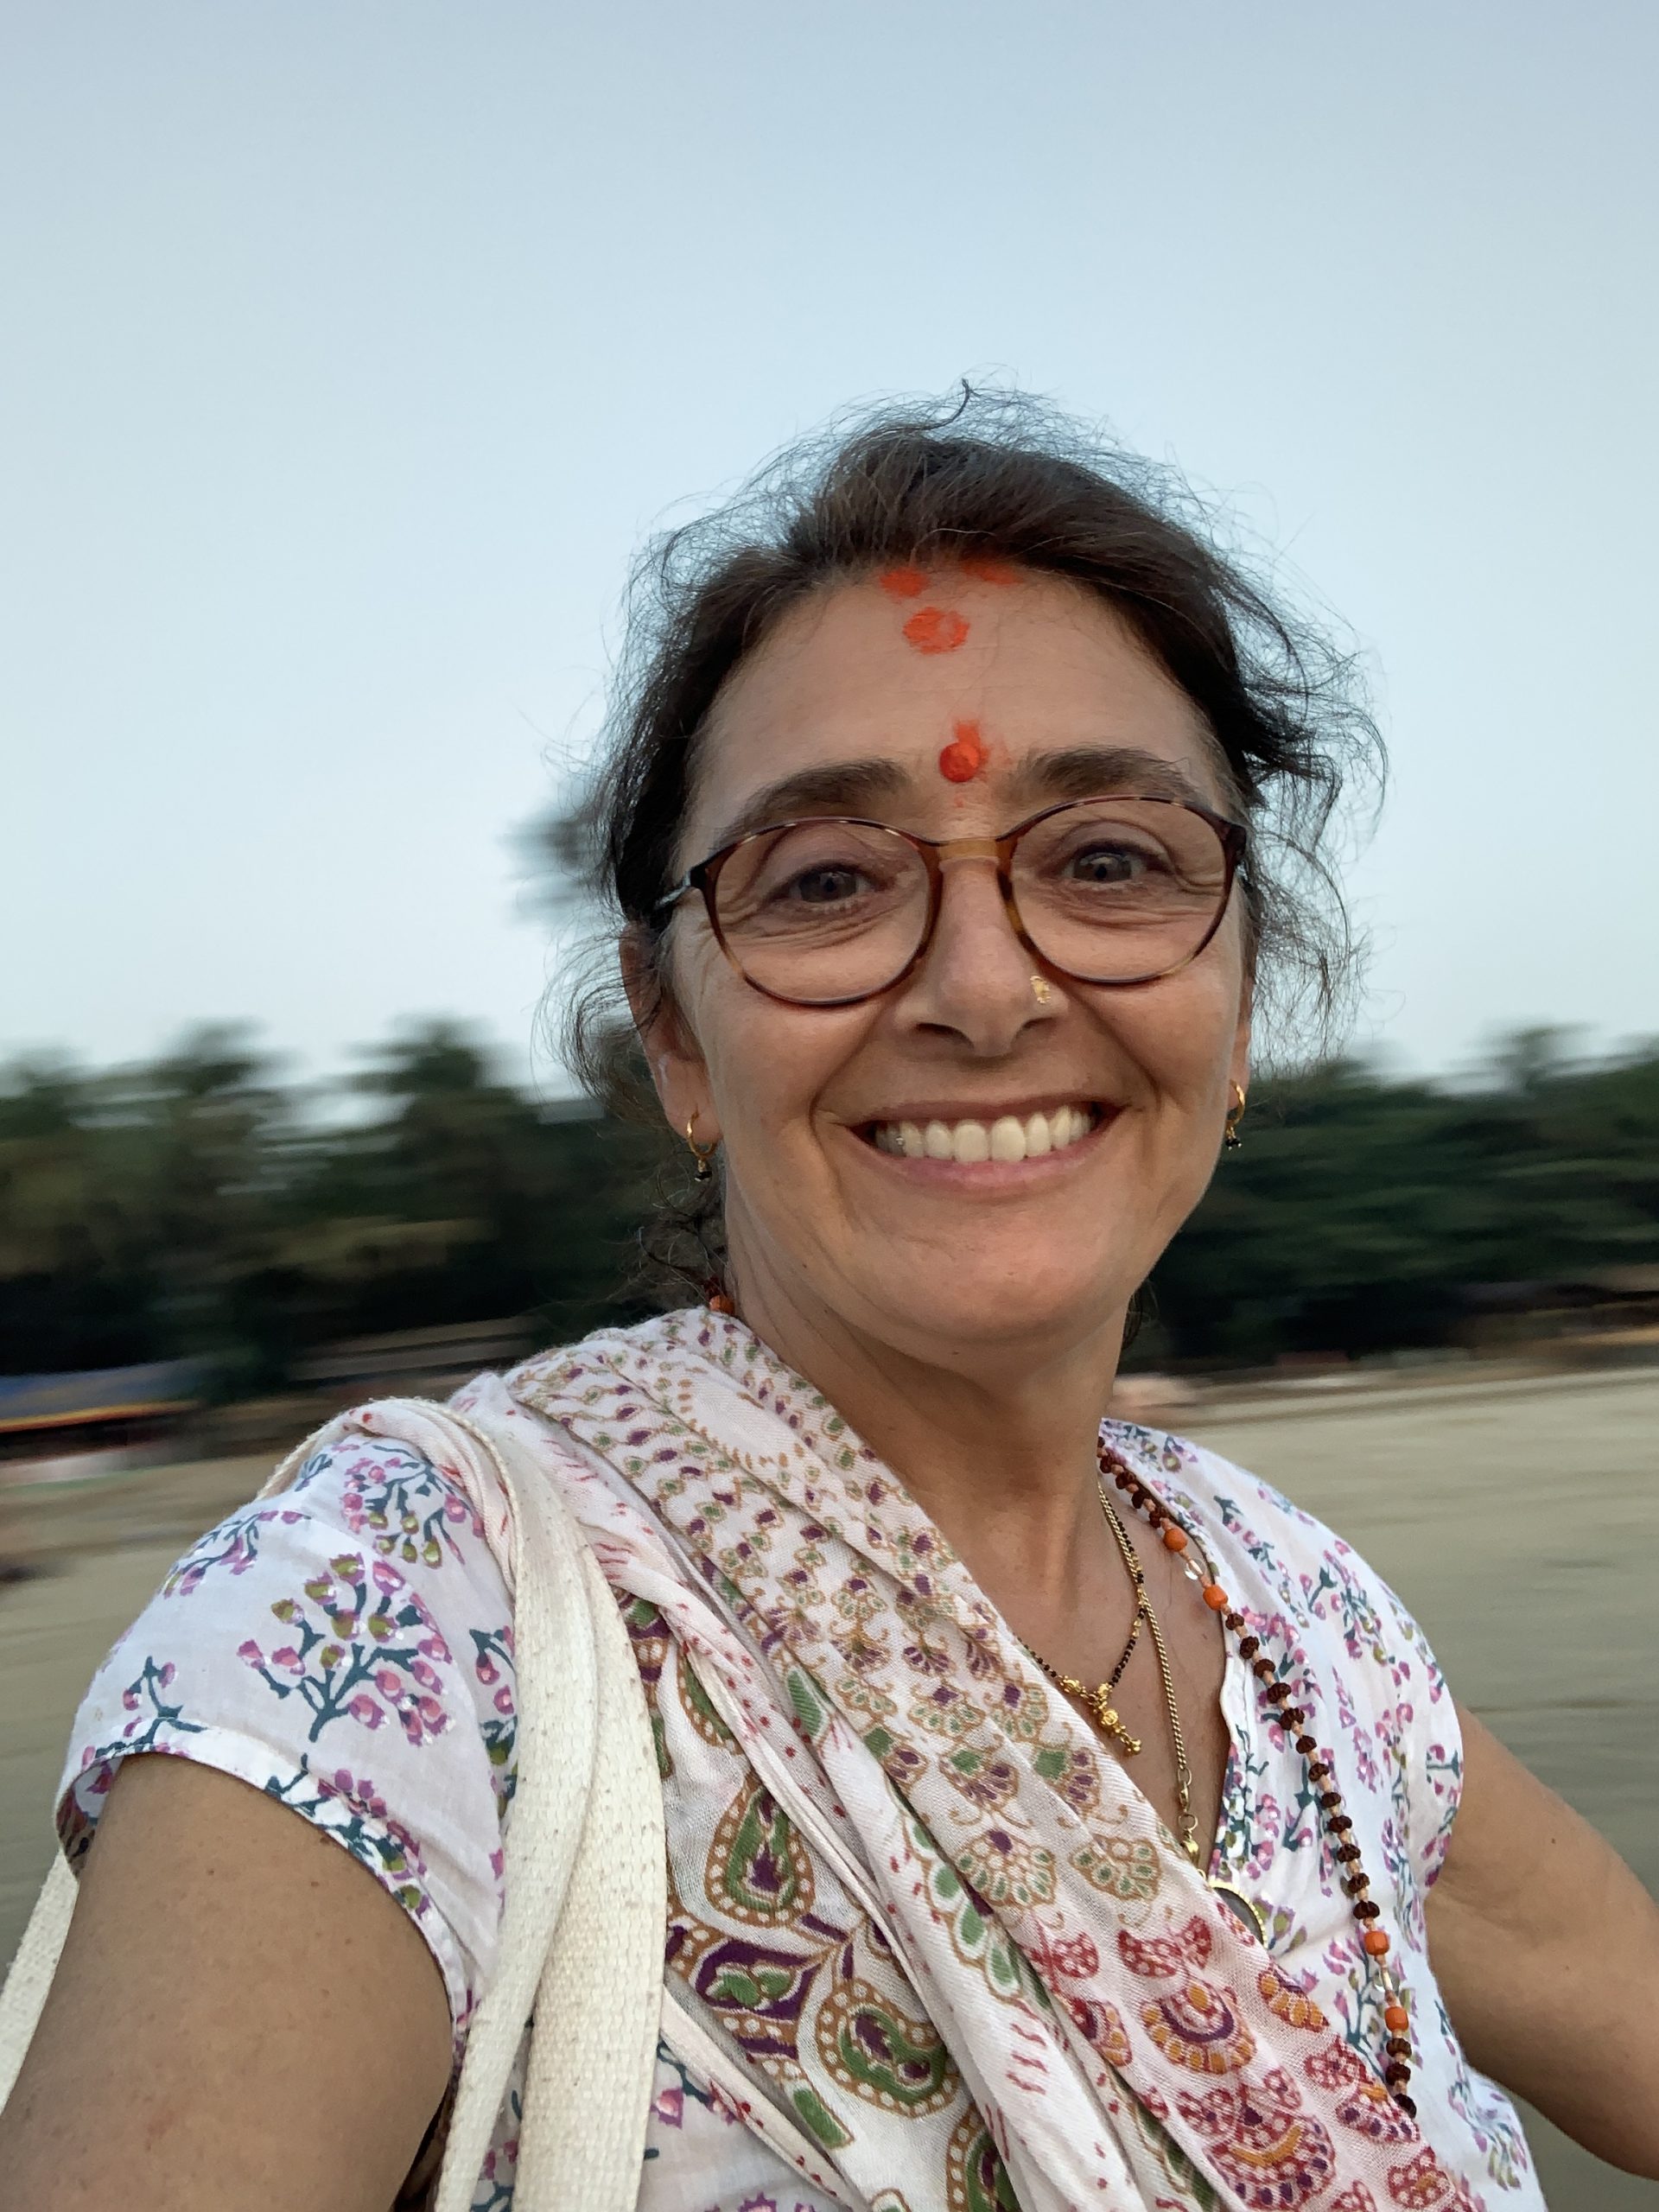 Mood-Boosting Activities During my journey an Indian woman capturing a selfie & her Vermilion on the forehead | yoga in my fresh air